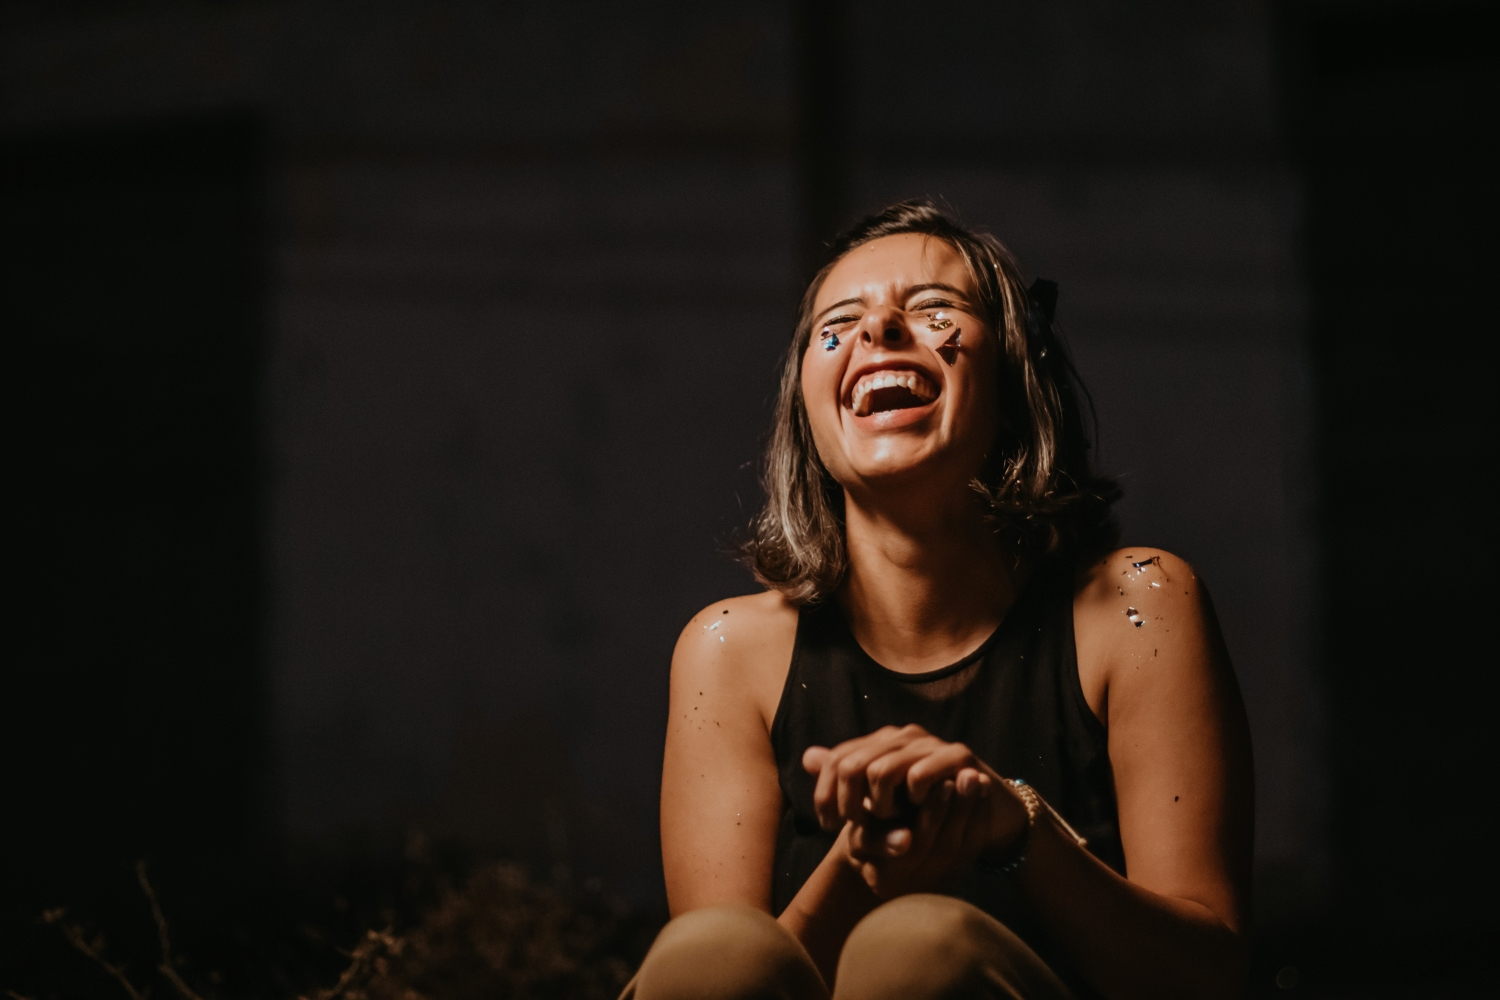 laughter can decrease stress hormones and improve mental health